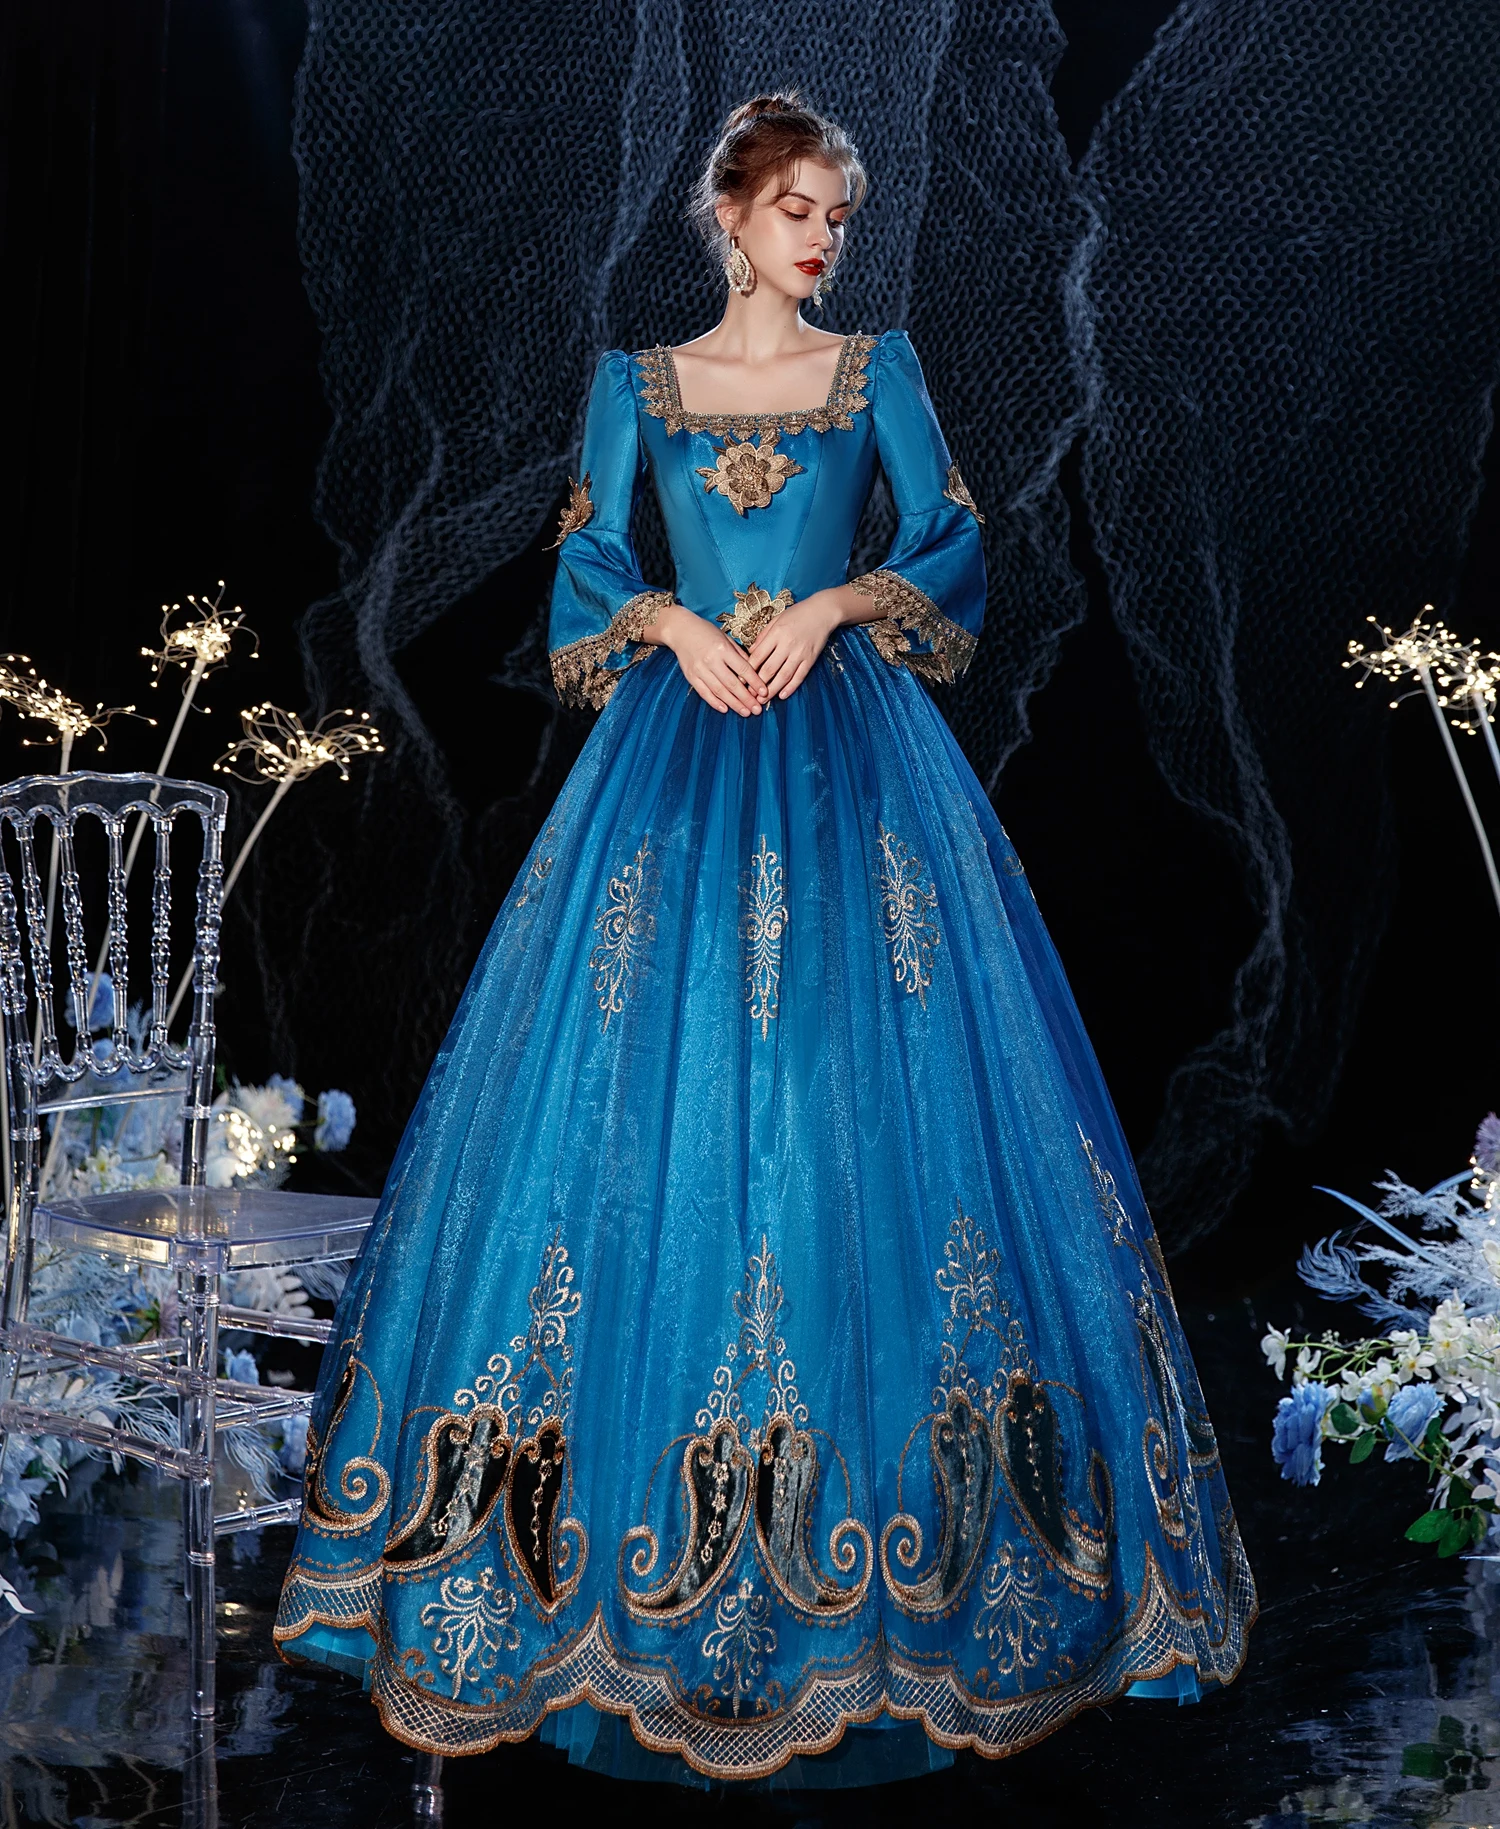 

18th Blue Victorian Court Retro Baroque Clothing Renaissance Vintage Inspired Rococo Marie Antoinette Costume Prom Dress